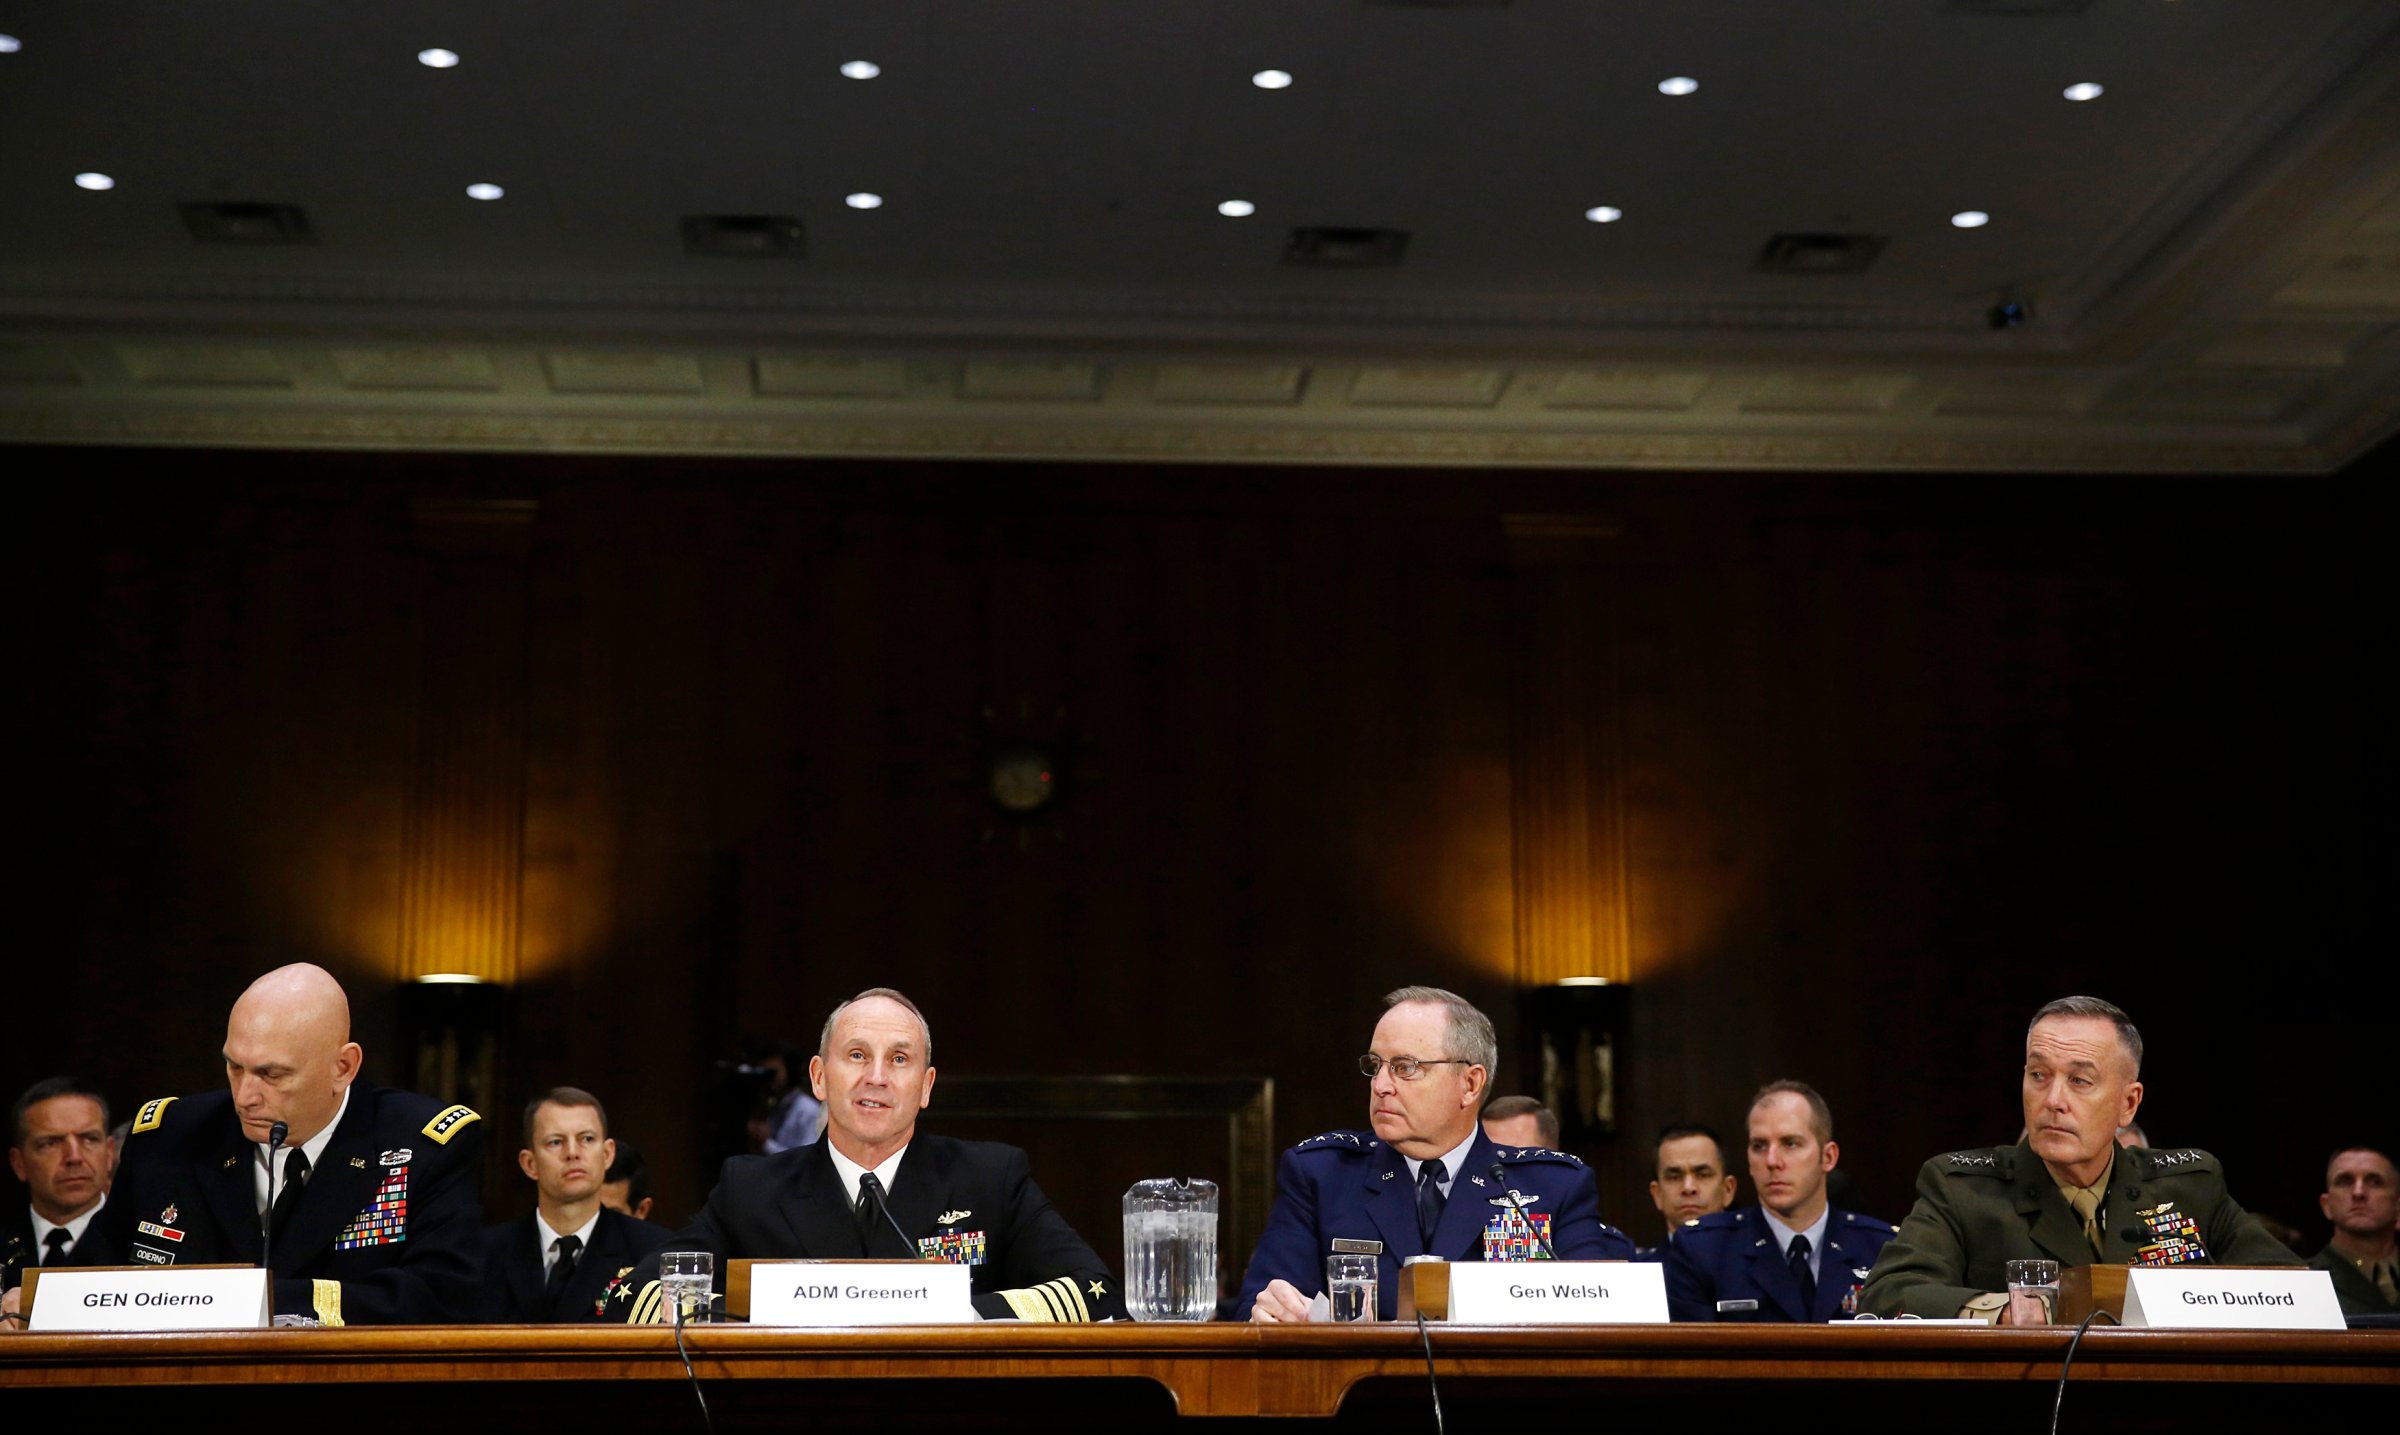 Leaders of US military branches testify on military budgets before Senate Armed Services Committee in Washington